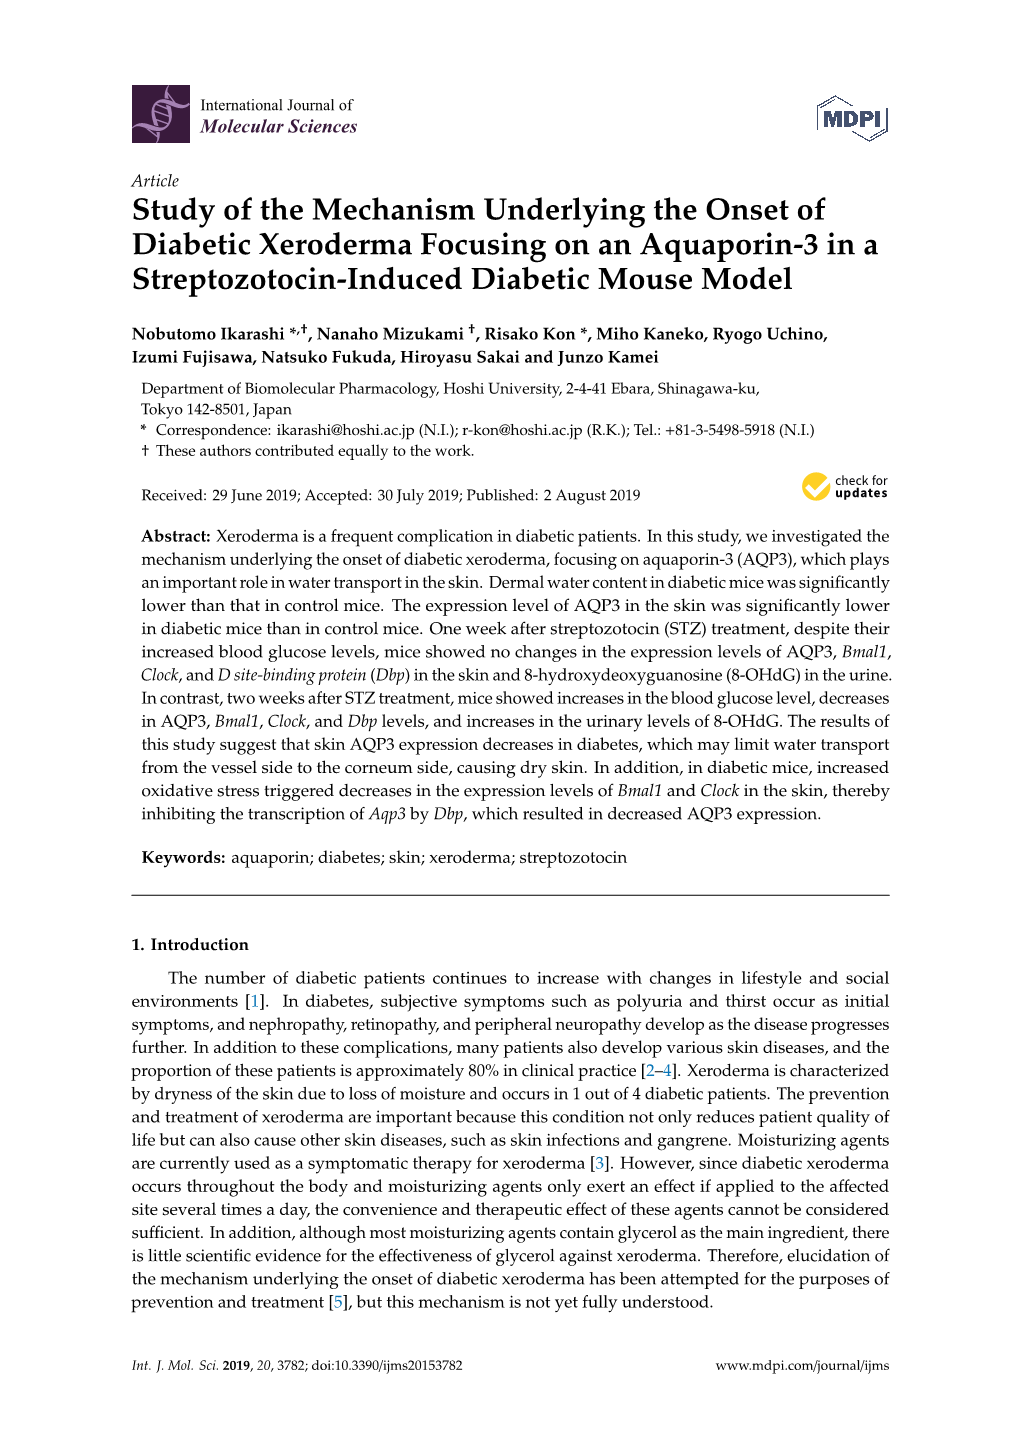 Study of the Mechanism Underlying the Onset of Diabetic Xeroderma Focusing on an Aquaporin-3 in a Streptozotocin-Induced Diabetic Mouse Model